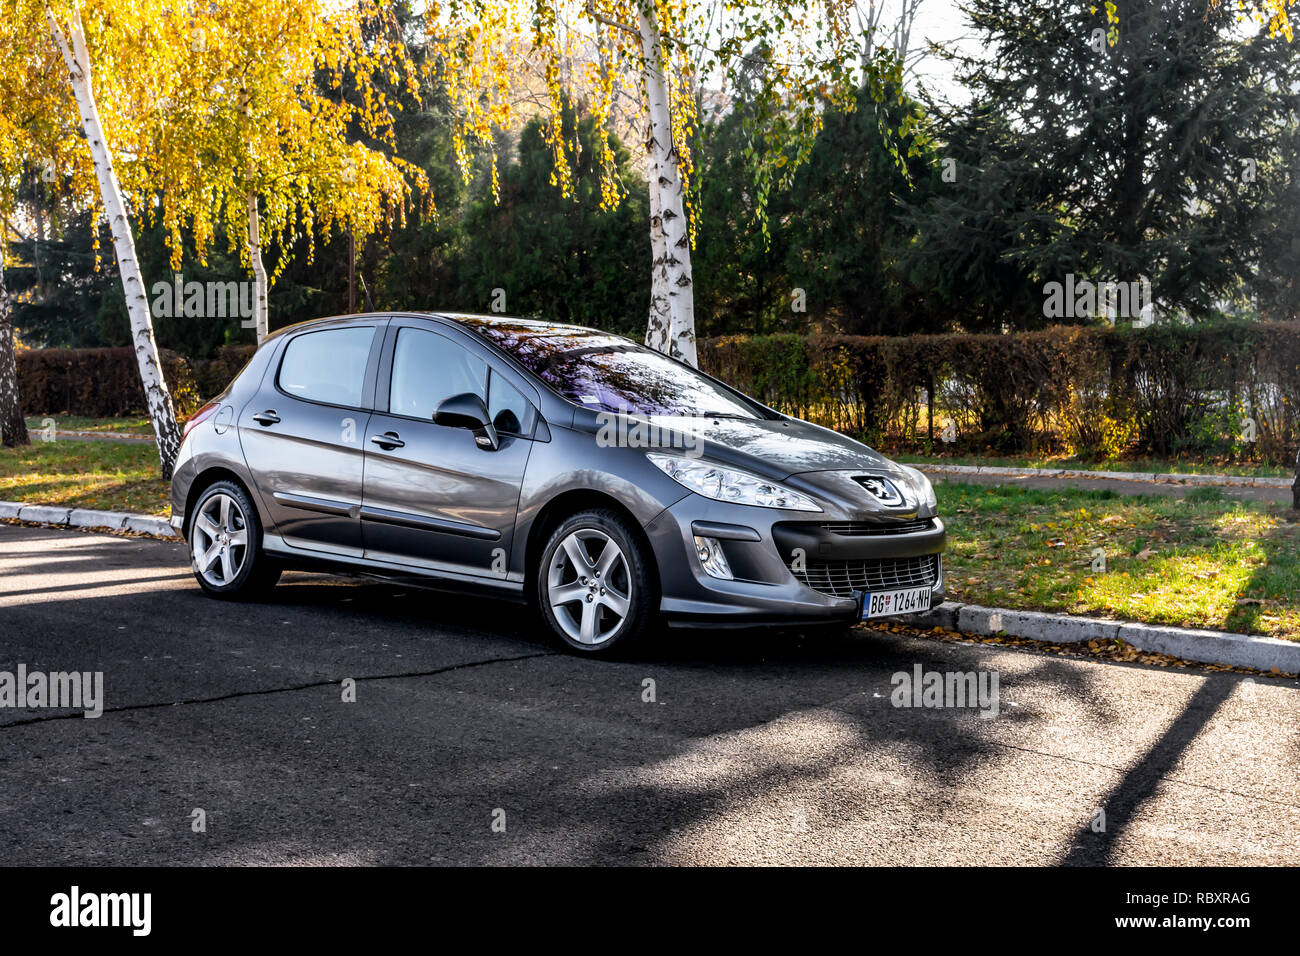 Belgrade, Serbia - 11.21.2018 / Peugeot 308 2.0 hdi, with gray color, parked on the street, near tree with yellow leaves, big alloy wheels. Stock Photo